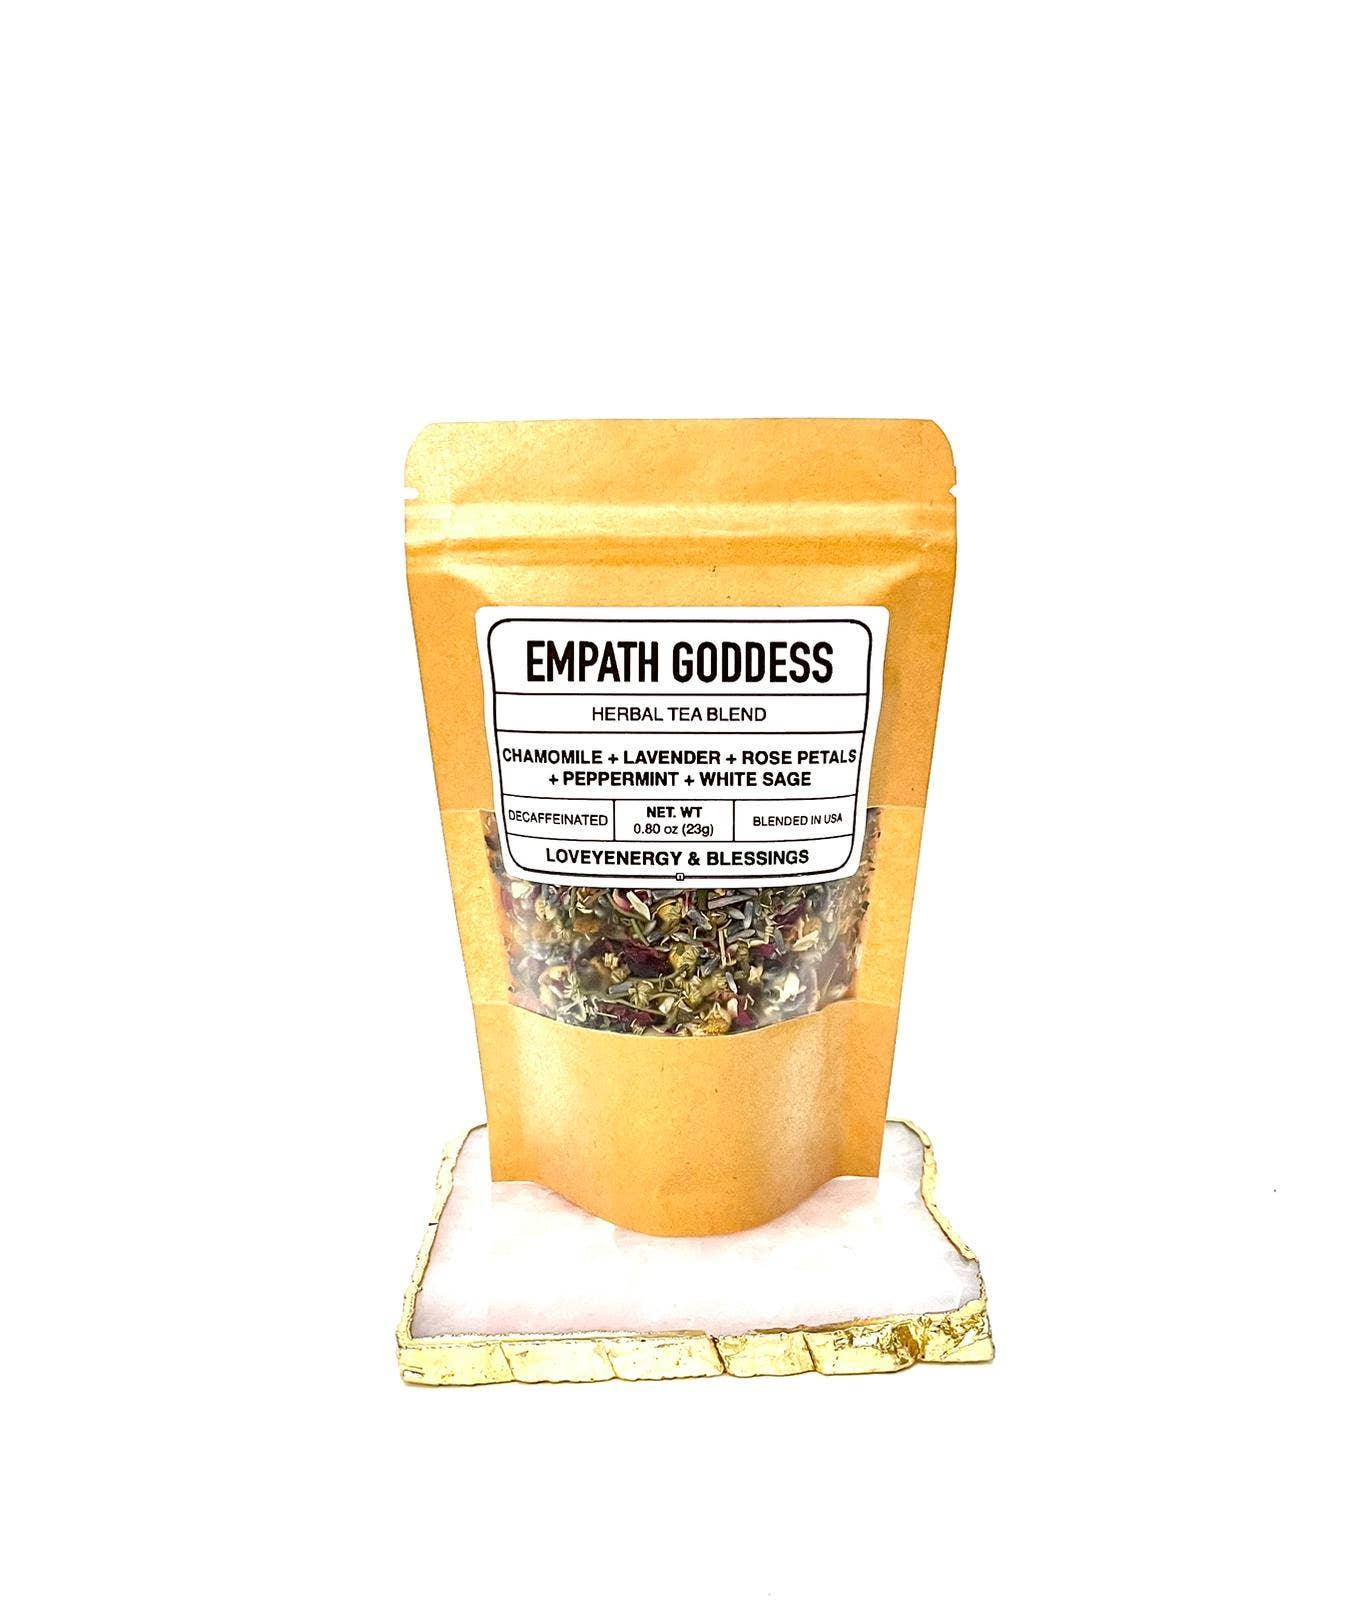 EMPATH GODDESS Handcrafted Herbal Tea Blend 13 Servings - Classic Variable